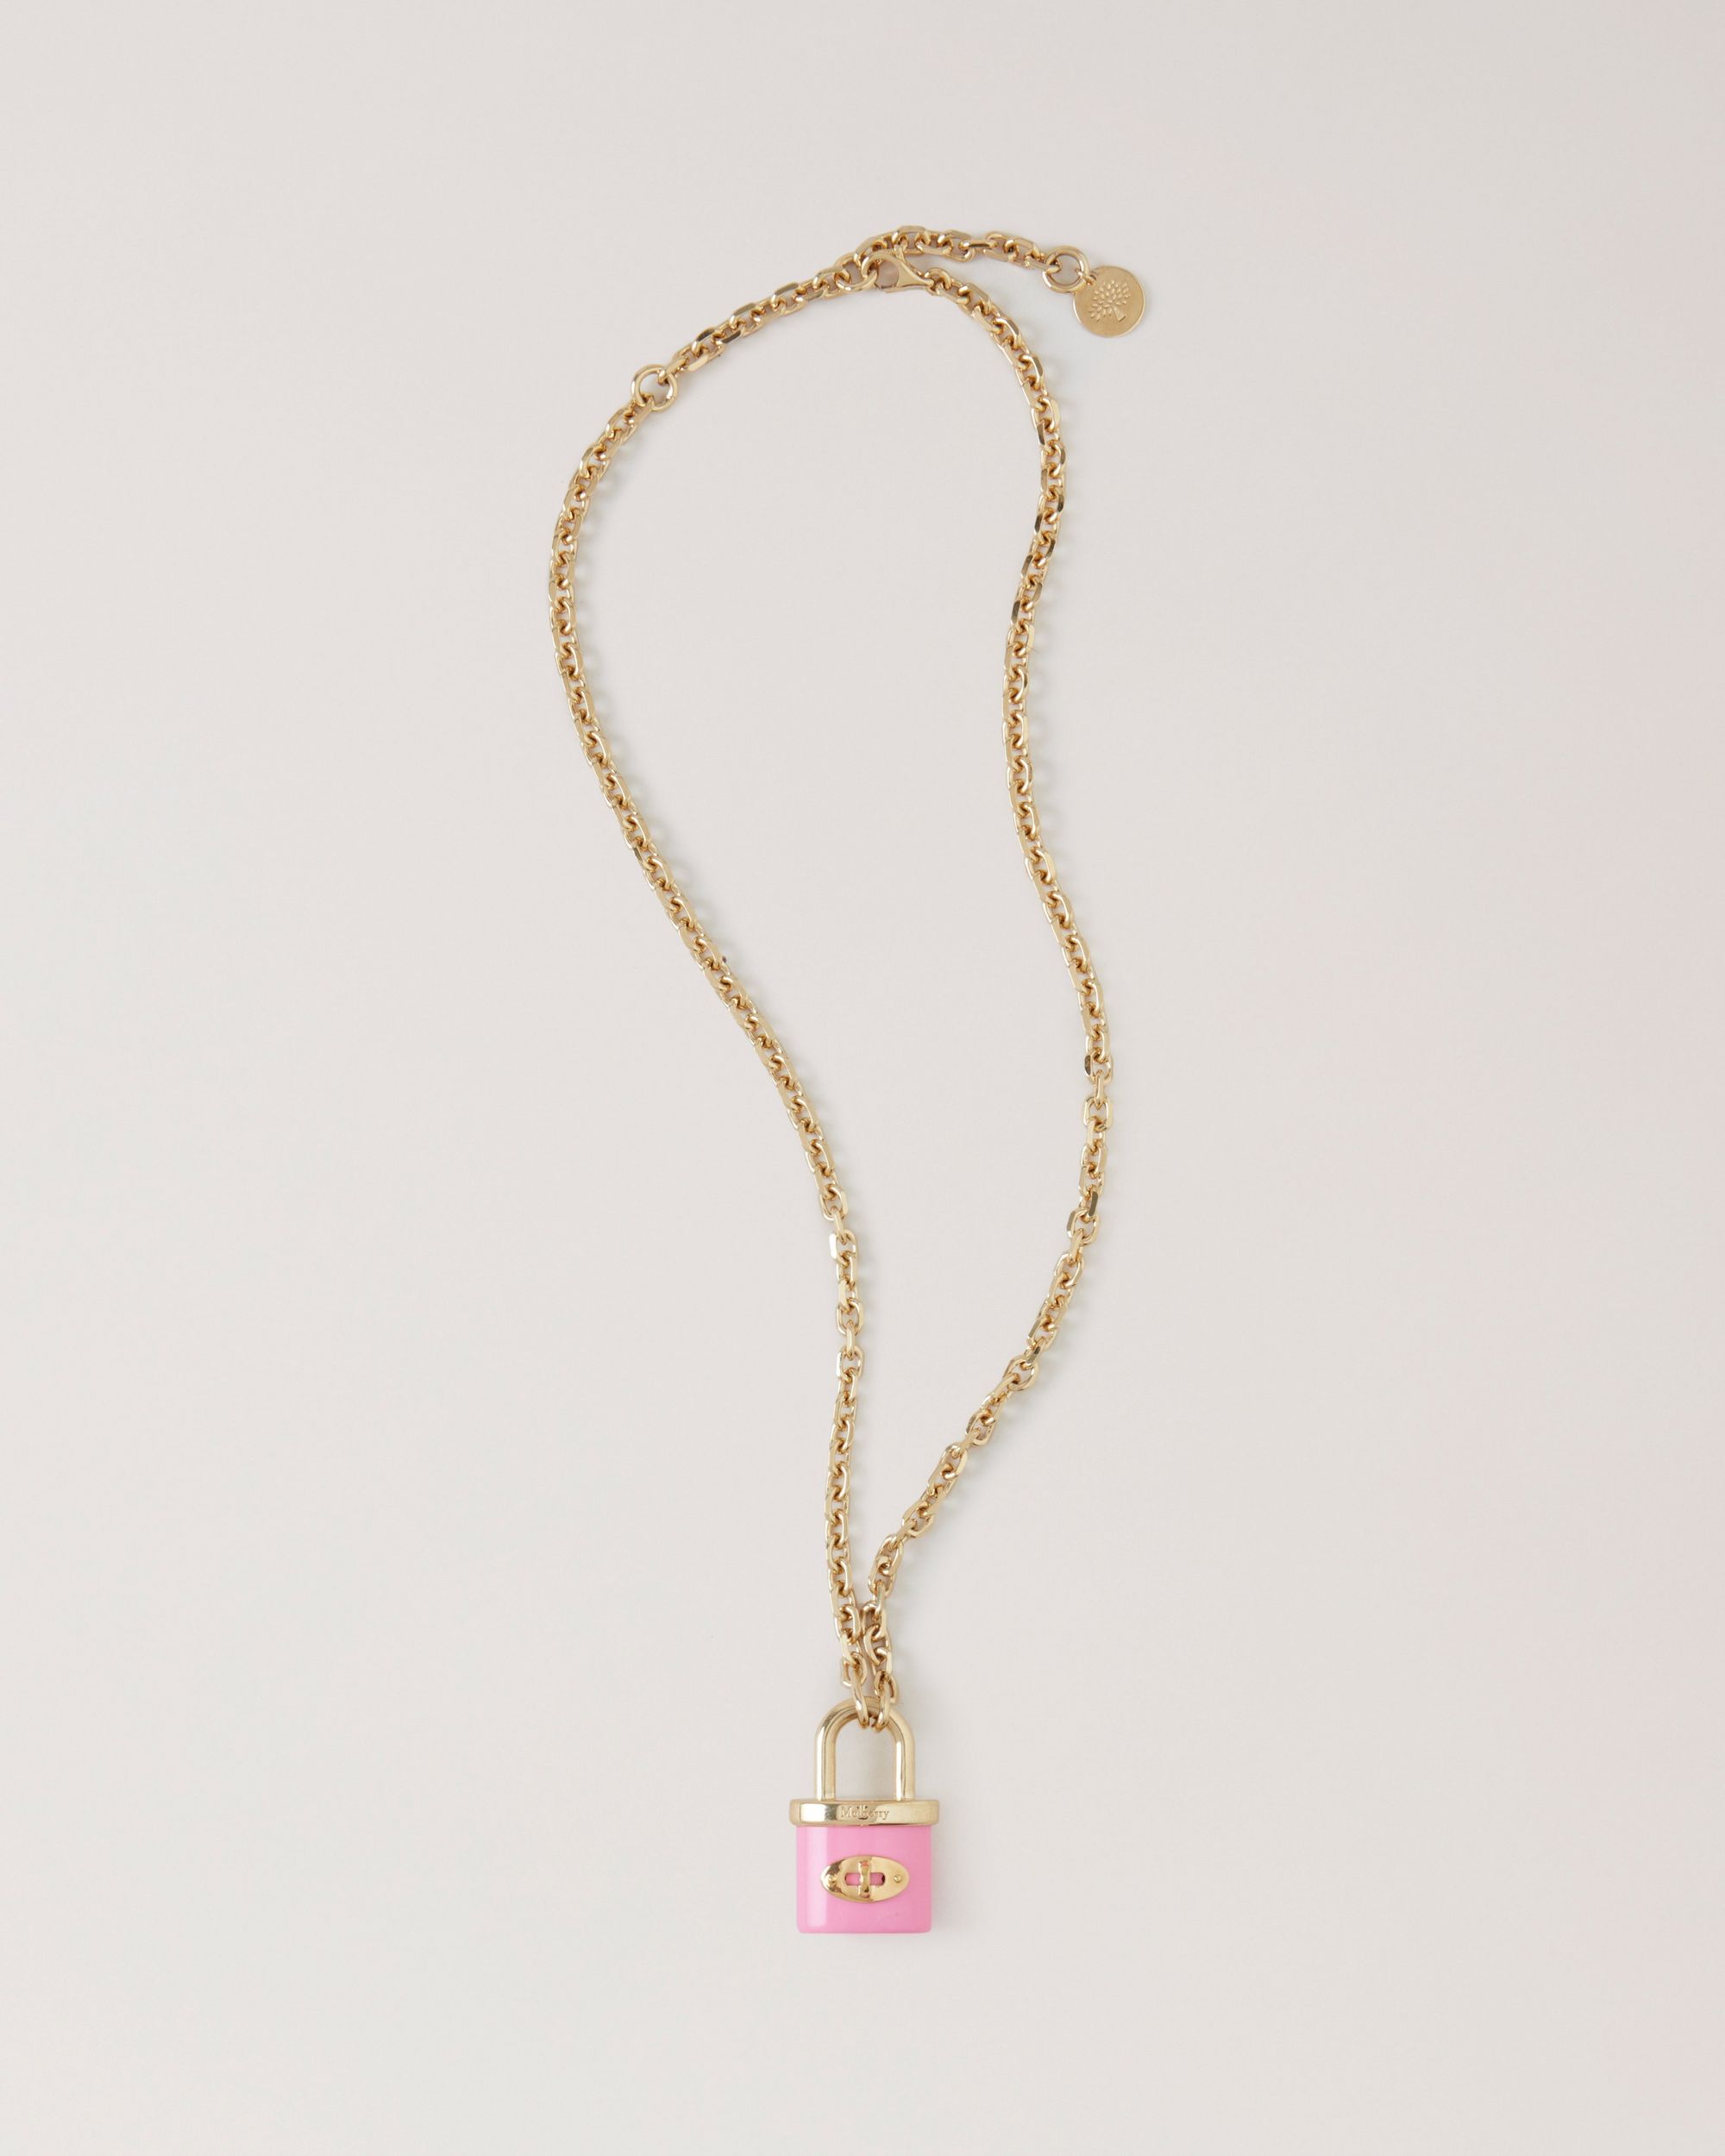 Pink locket necklace with gold chain